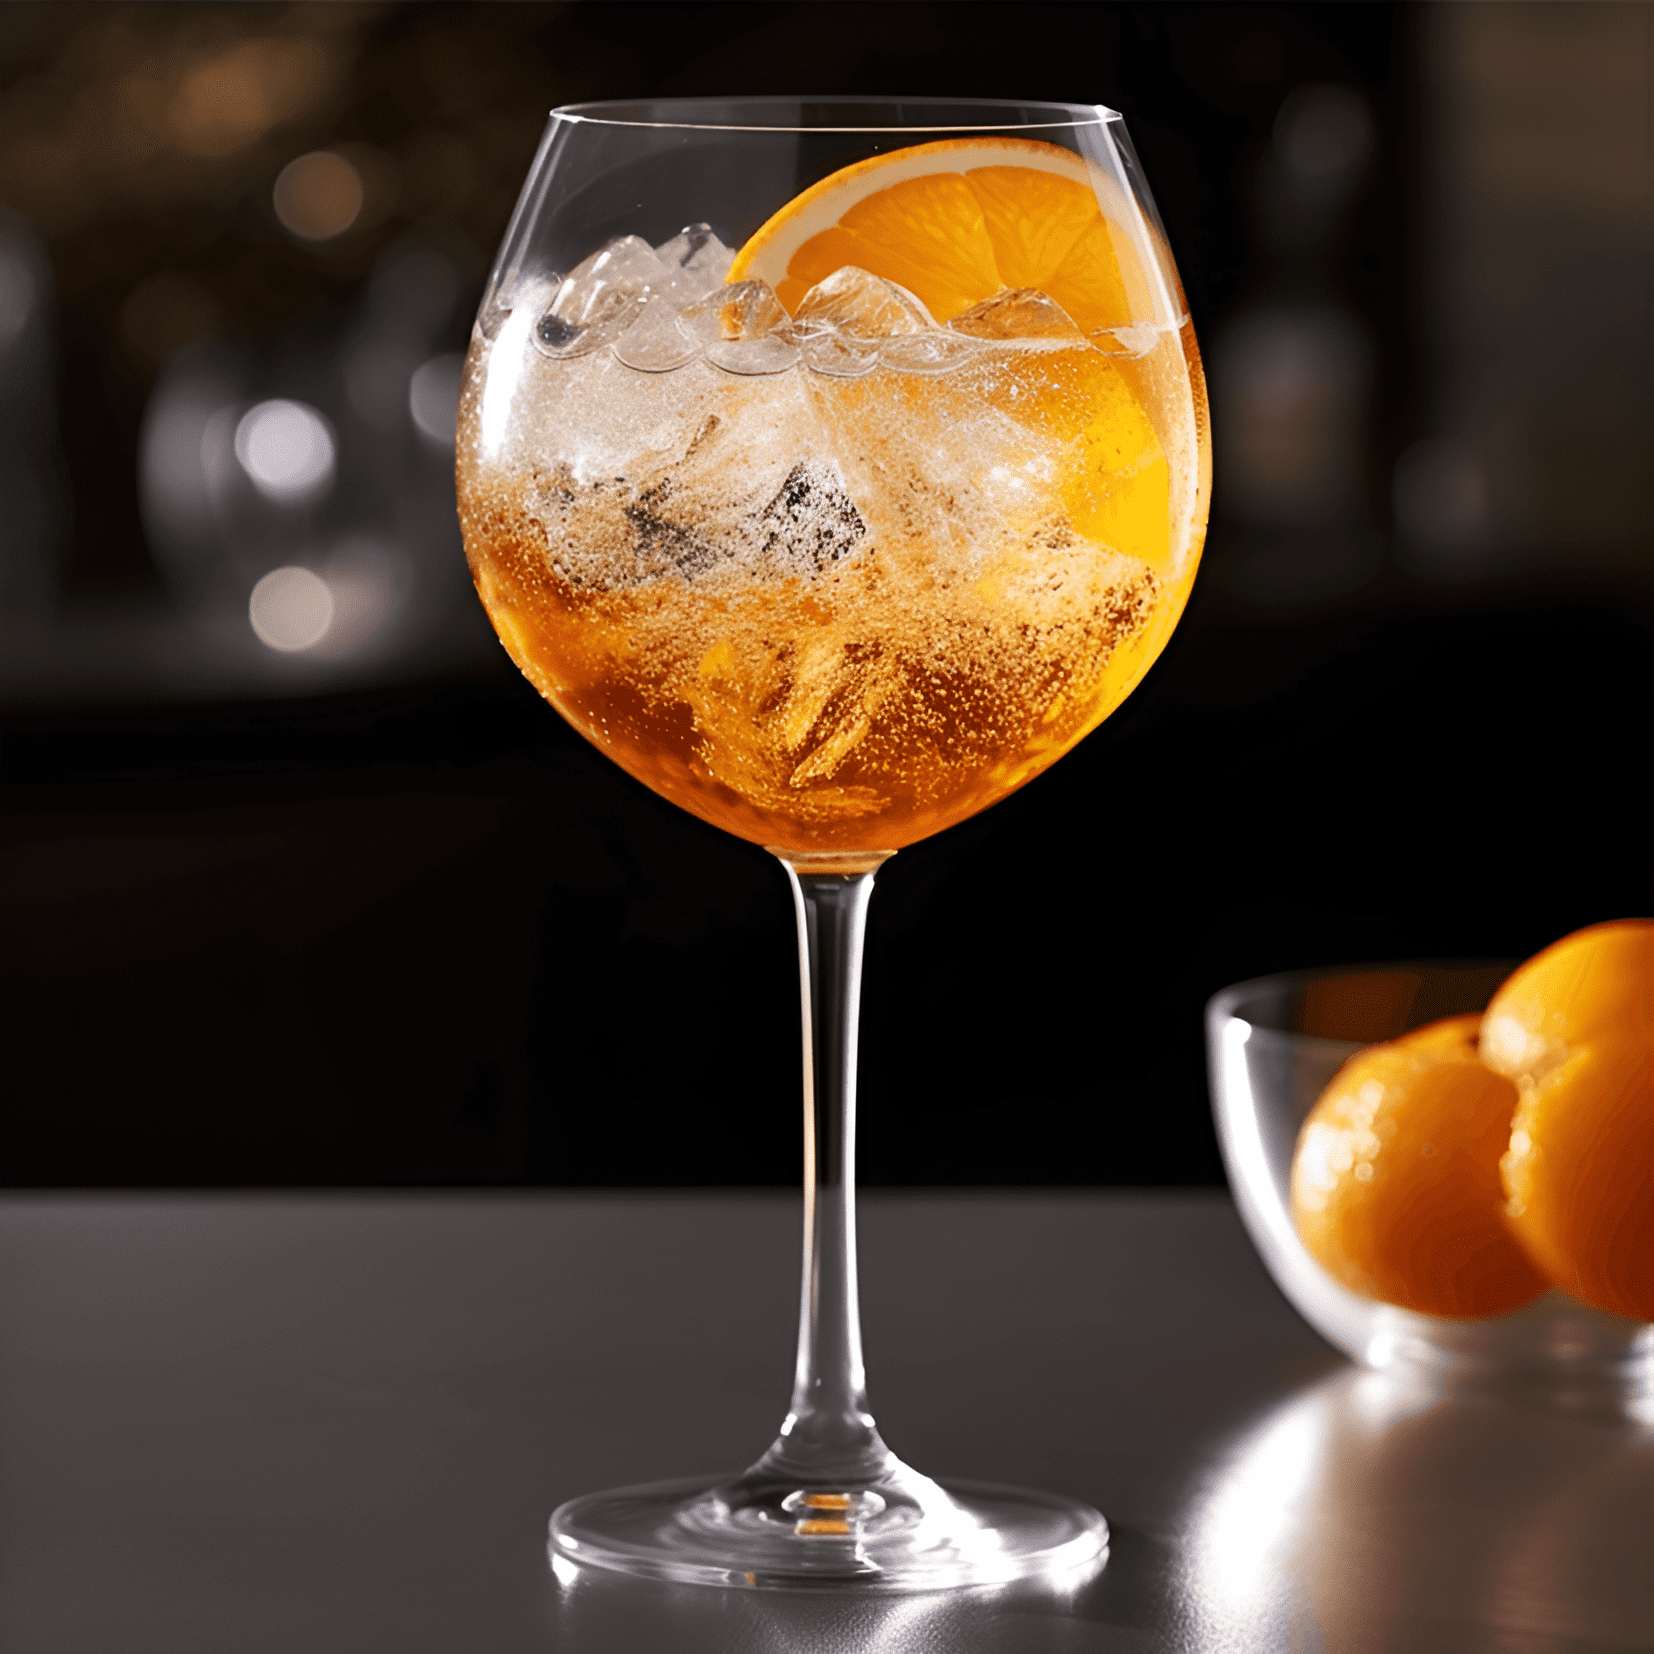 Spritz Veneziano Cocktail Recipe - Spritz Veneziano has a unique bittersweet taste, with a hint of citrus and herbal notes. It is light, refreshing, and effervescent.